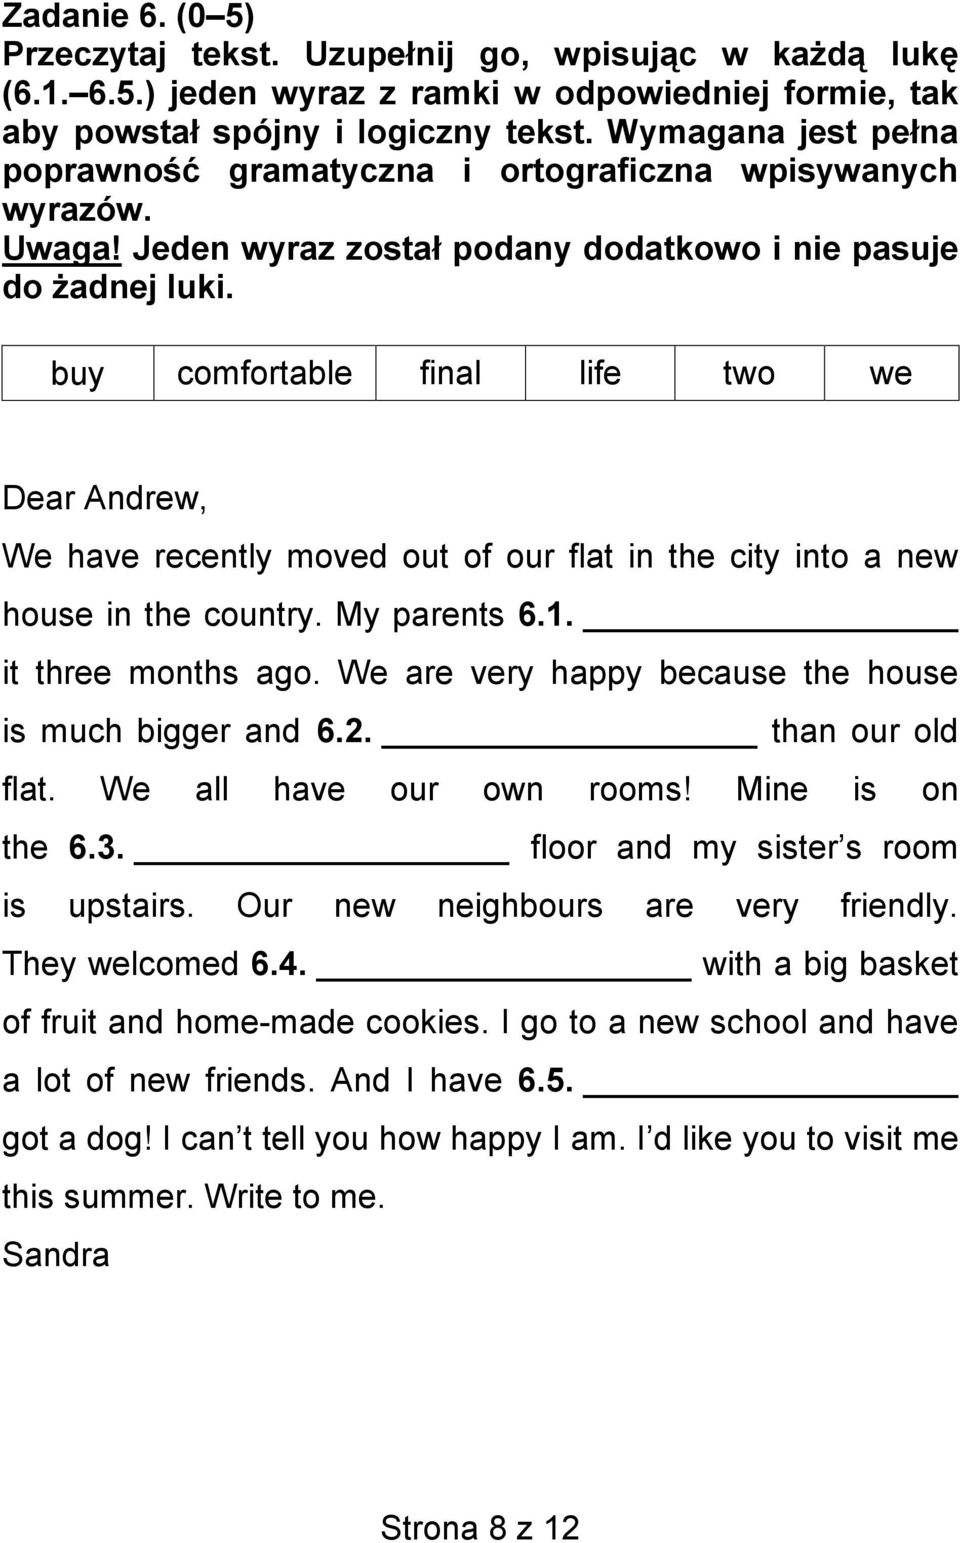 buy comfortable final life two we Dear Andrew, We have recently moved out of our flat in the city into a new house in the country. My parents 6.1. it three months ago.